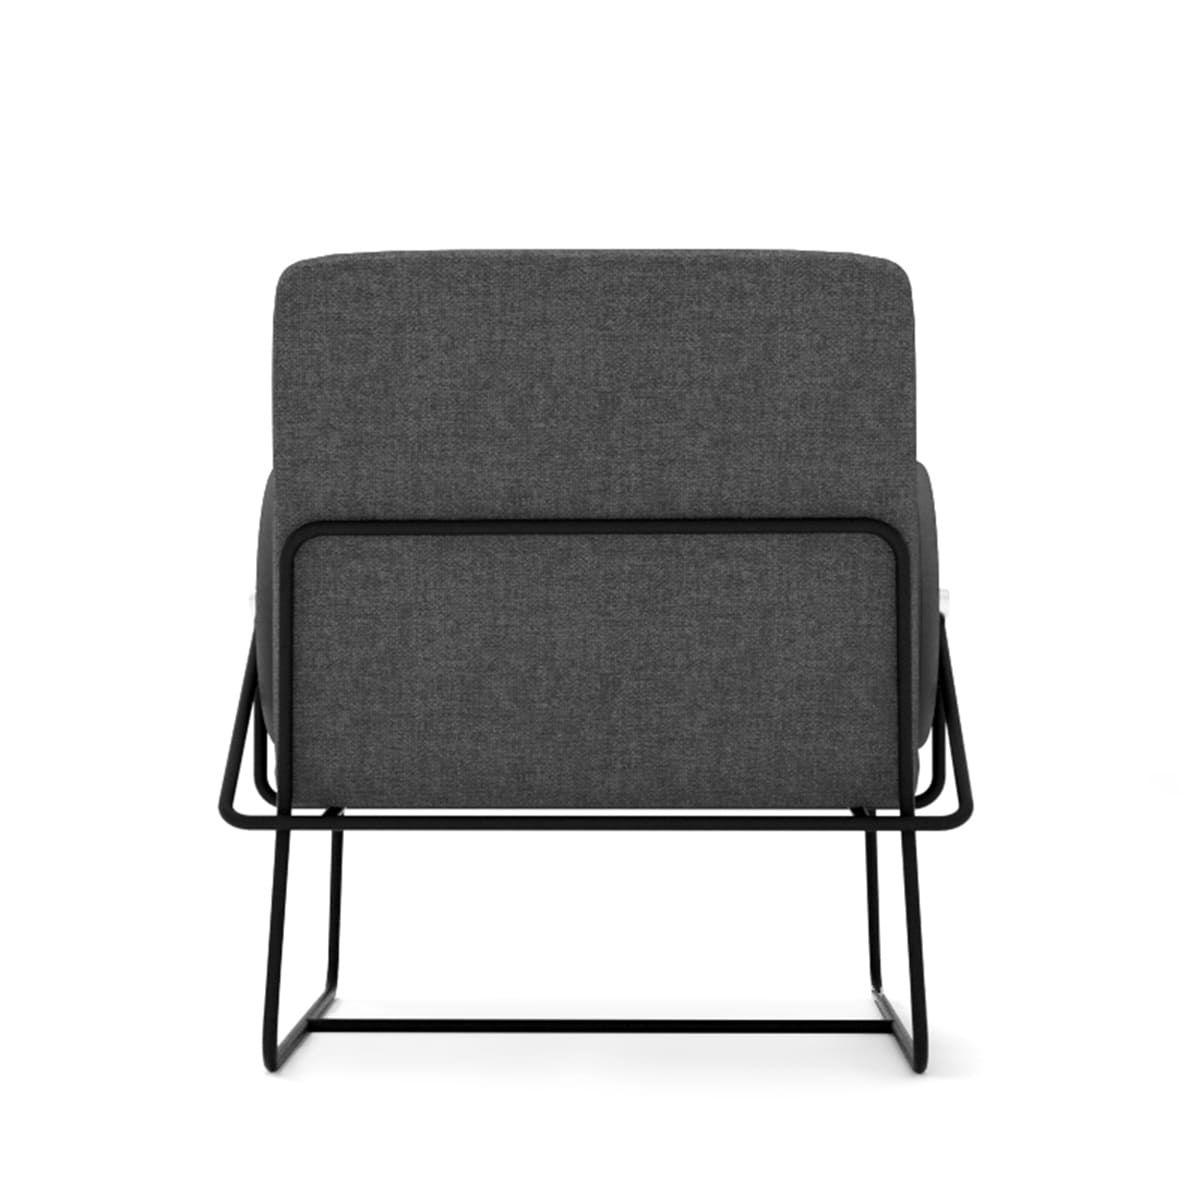  Long Lounge Chair - Charcoal Sunday 74 - Styled Image by Grado